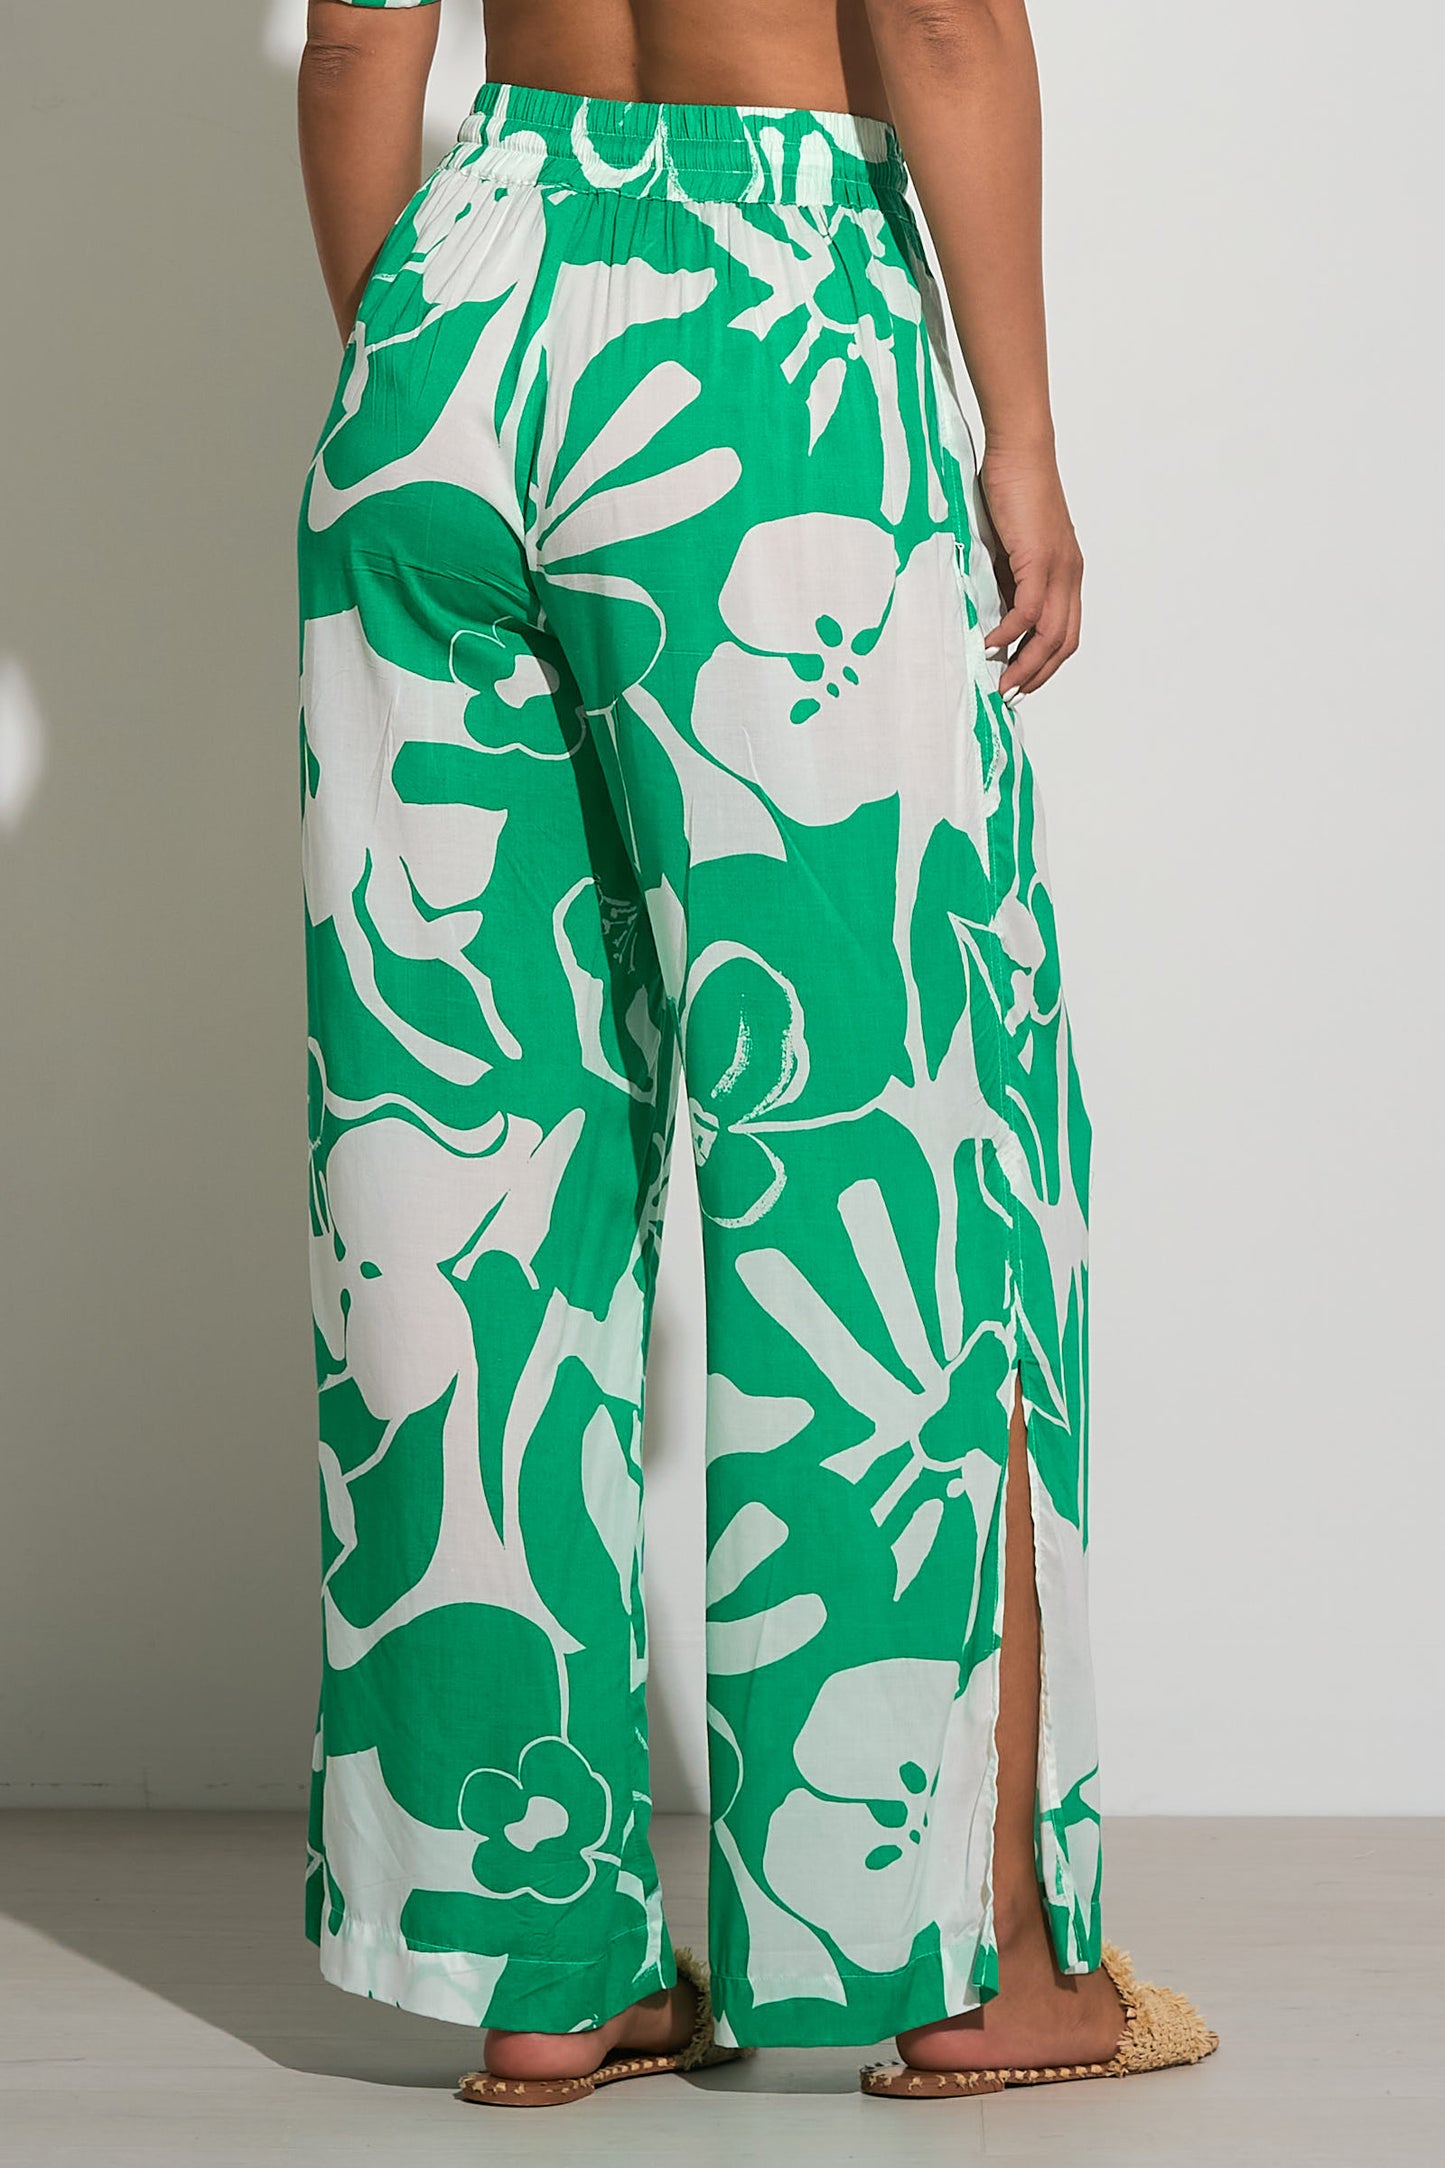 Pants with Side Slit and Elastic Waistband - Green Hibiscus